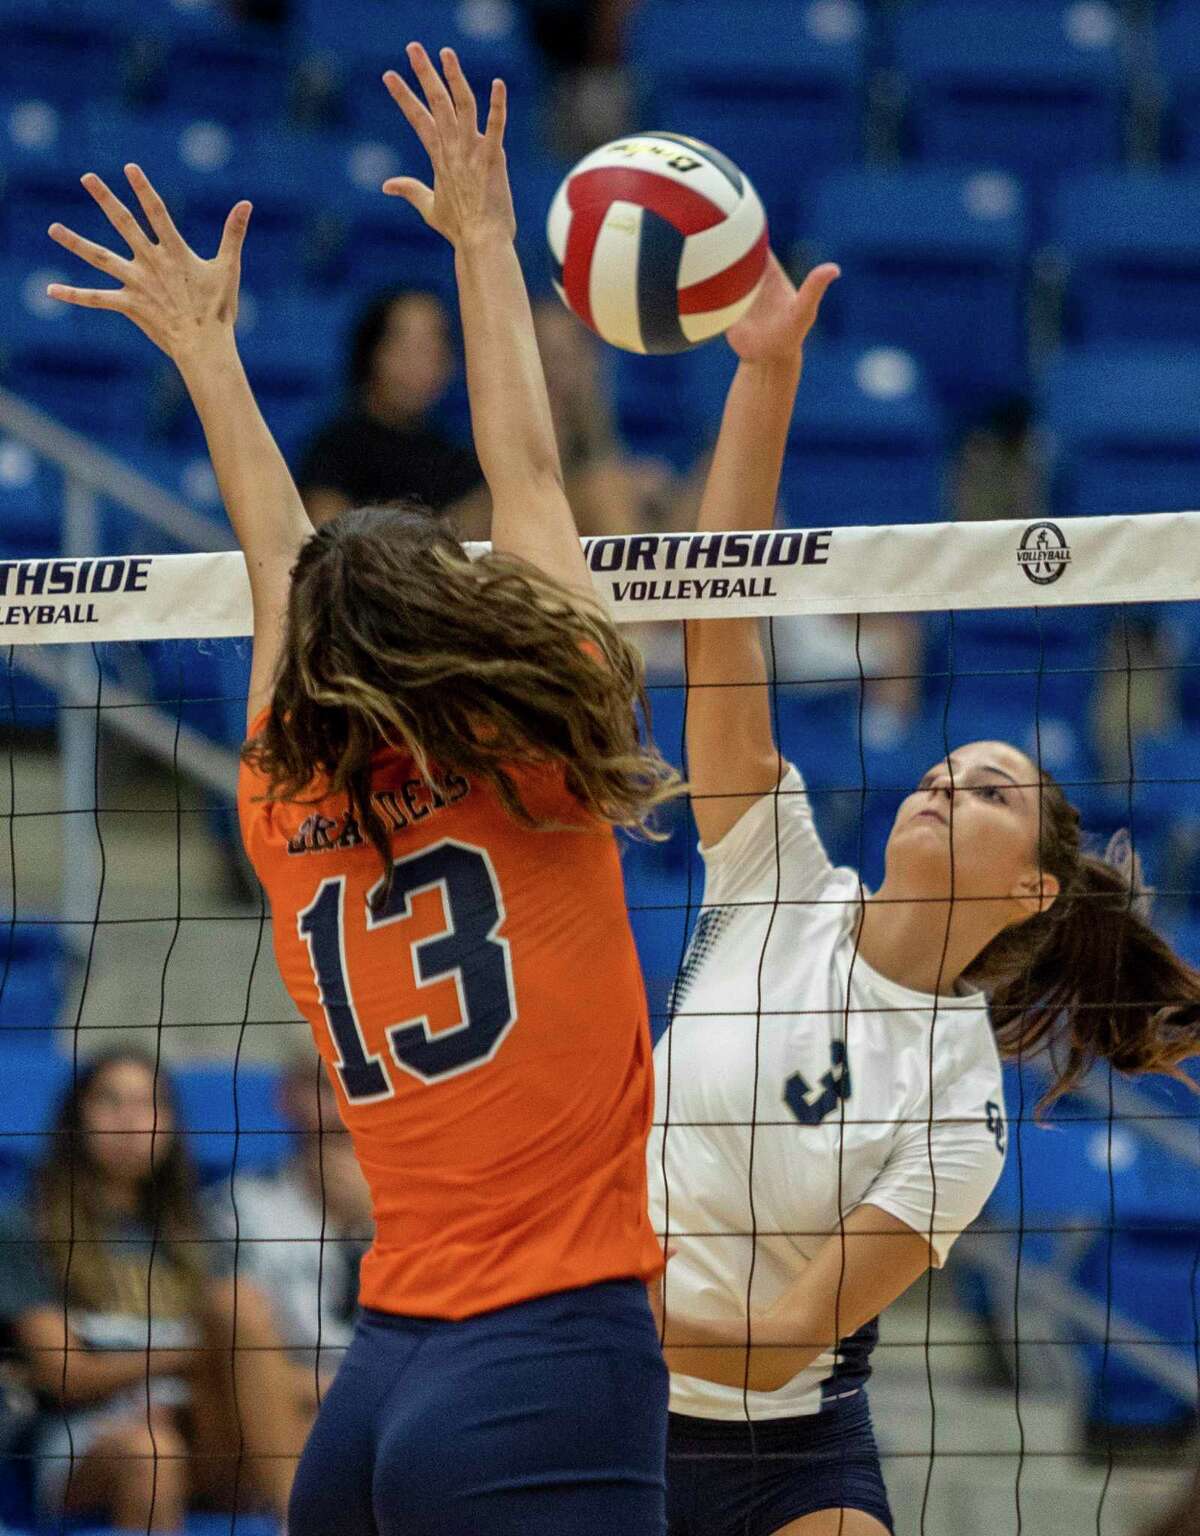 Brandeis’s Sophia Kuyn, left, defends Monday, Aug. 8, 2022 against a shot by O’Connor’s Kelli Fording during the Broncos’ game against the Panthers at the Northside Sports Gym.